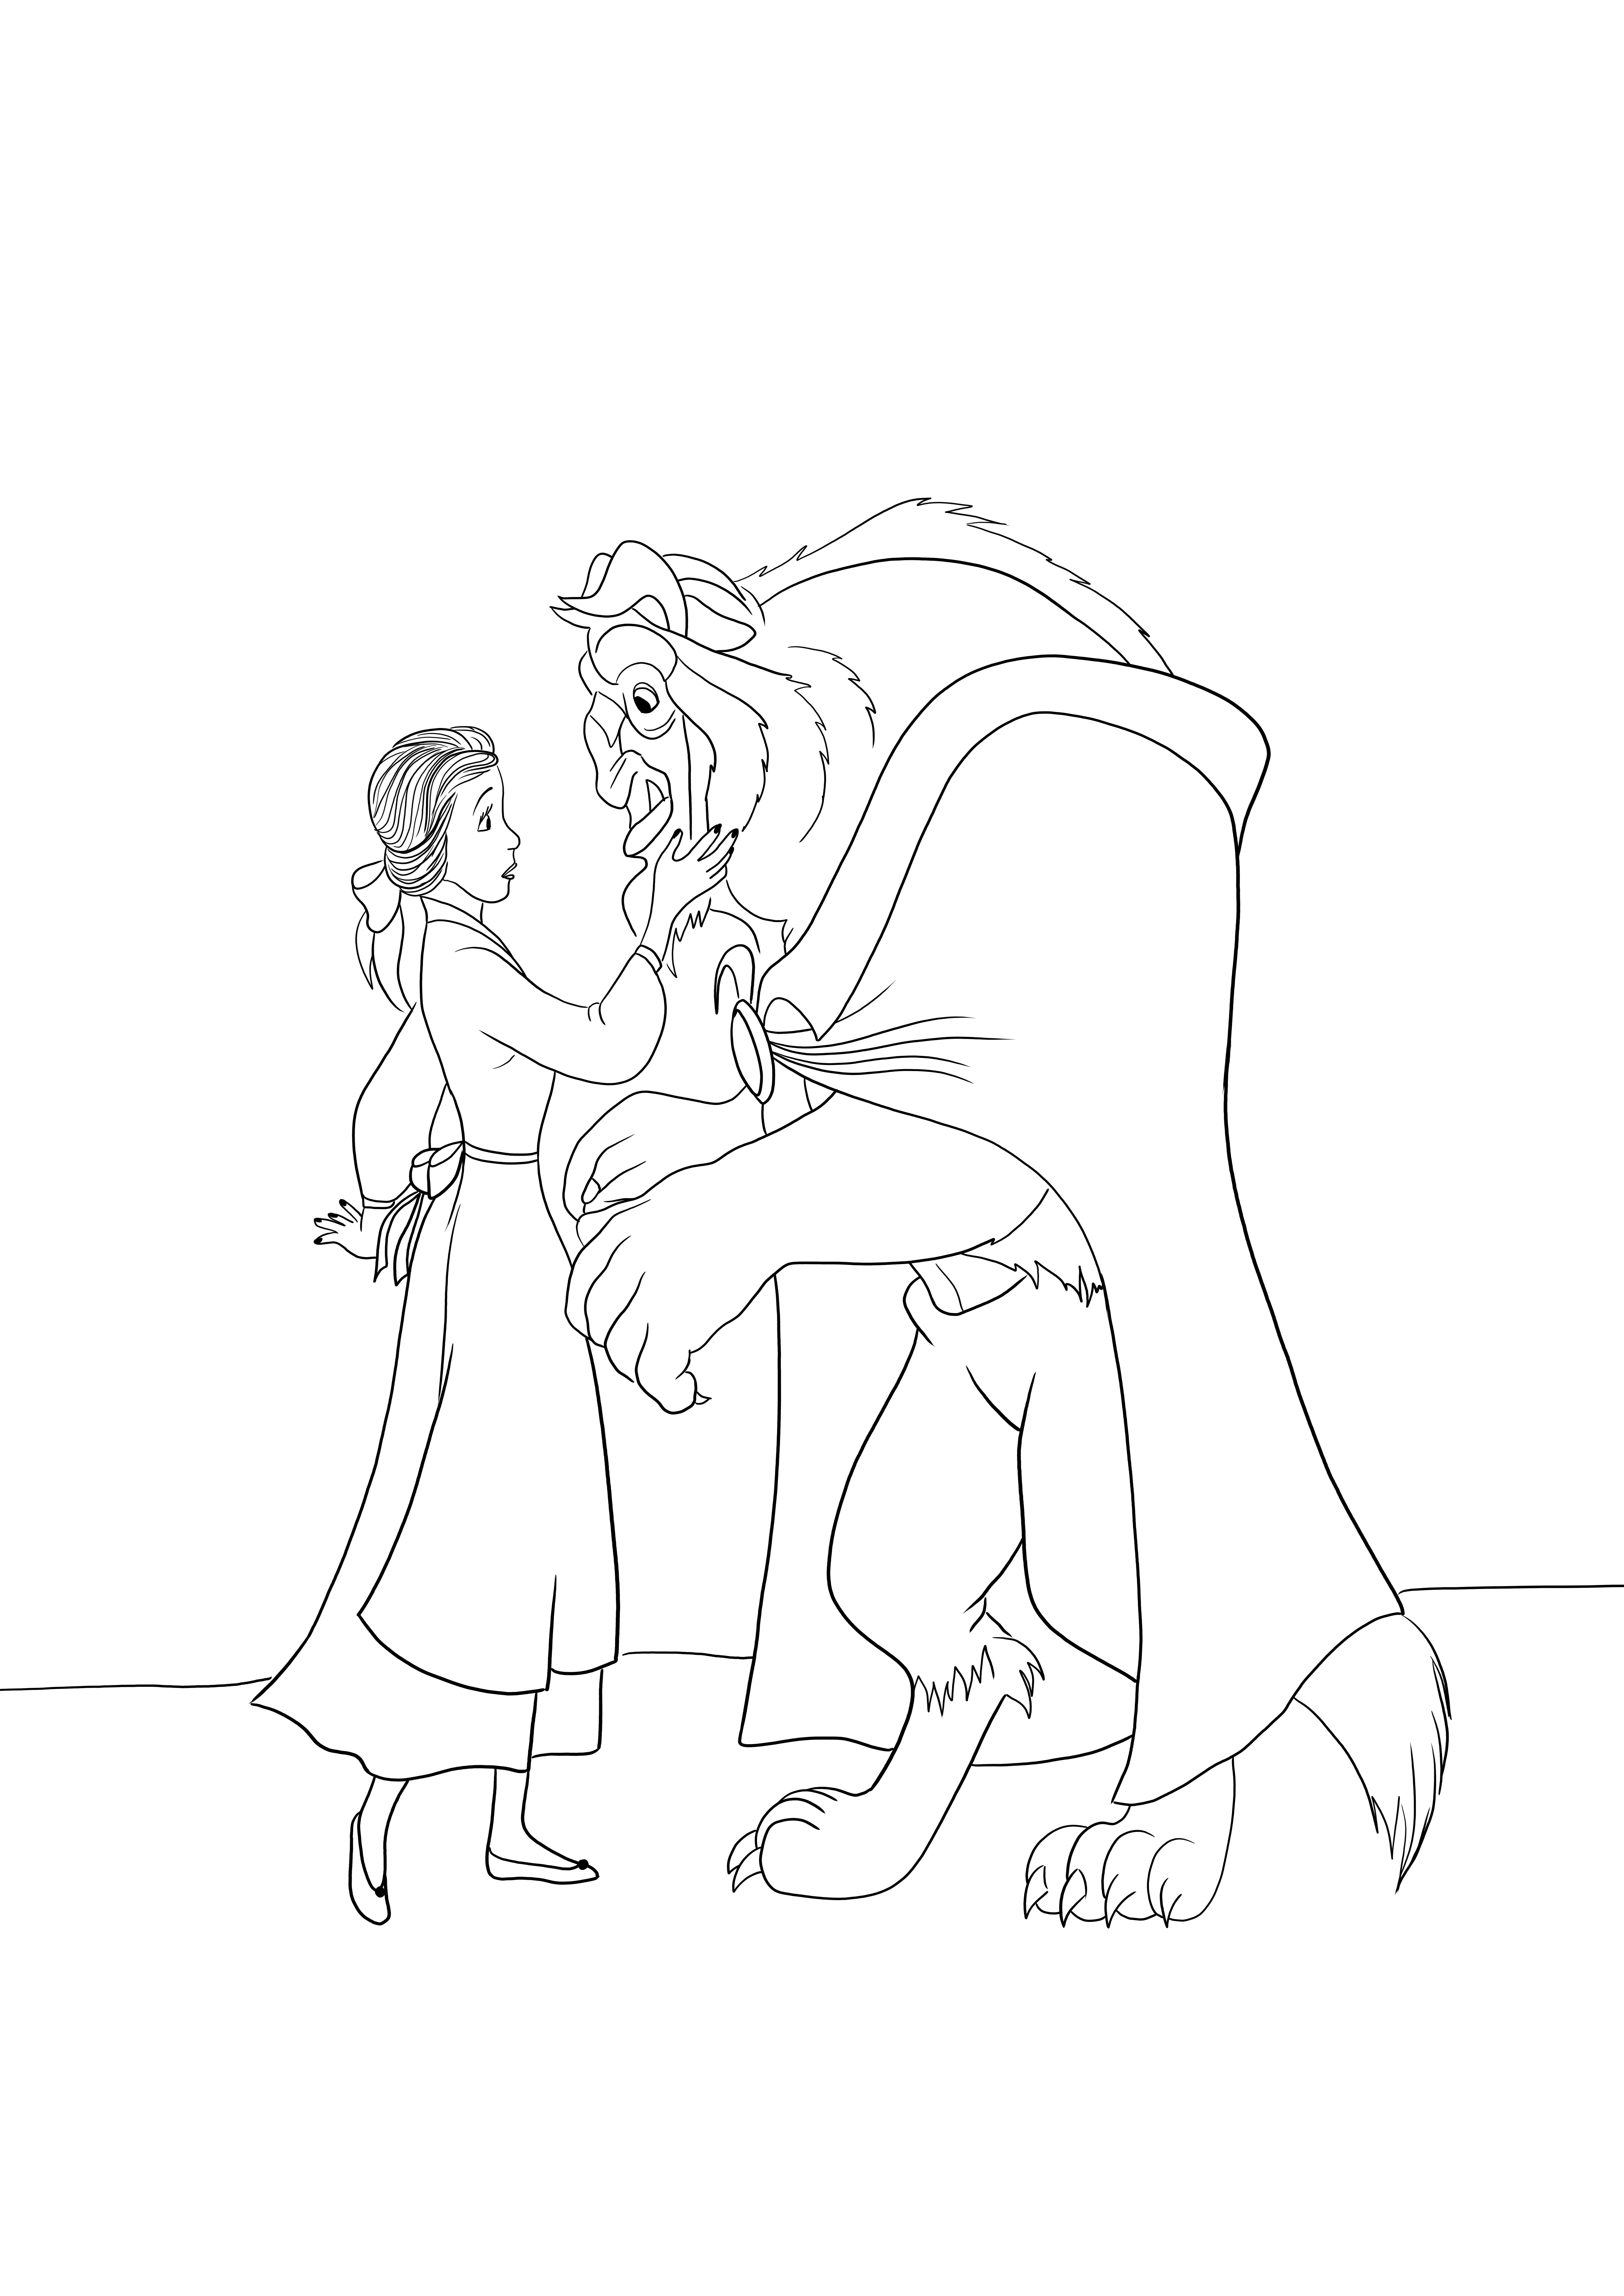 Disney Princess Belle and the Beast coloring image for free download